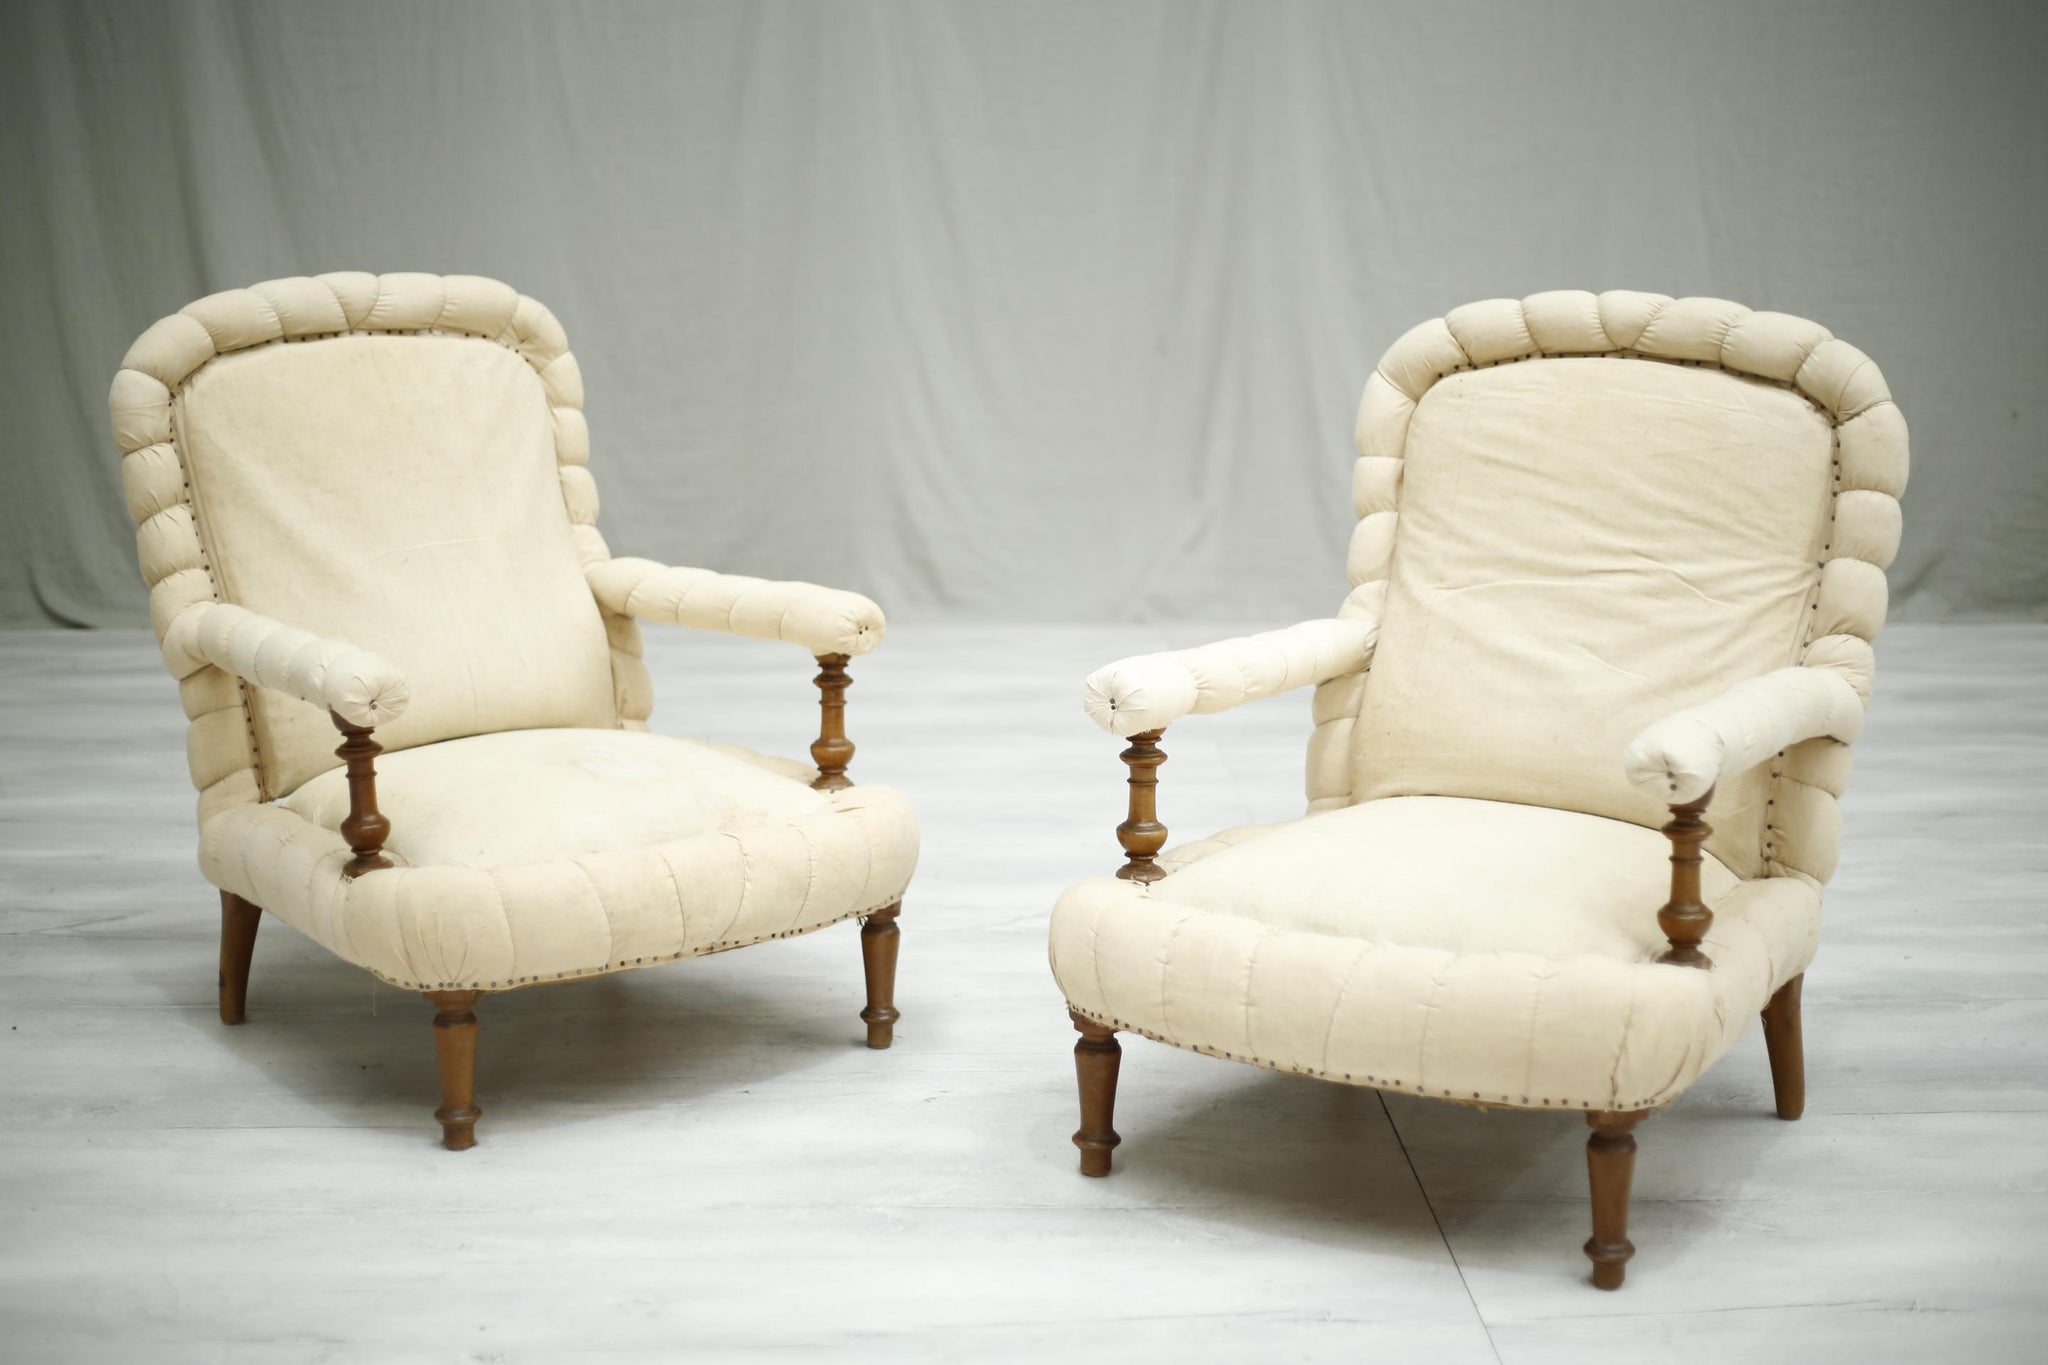 Pair of Antique 19th century French pie crust open armchairs - TallBoy Interiors